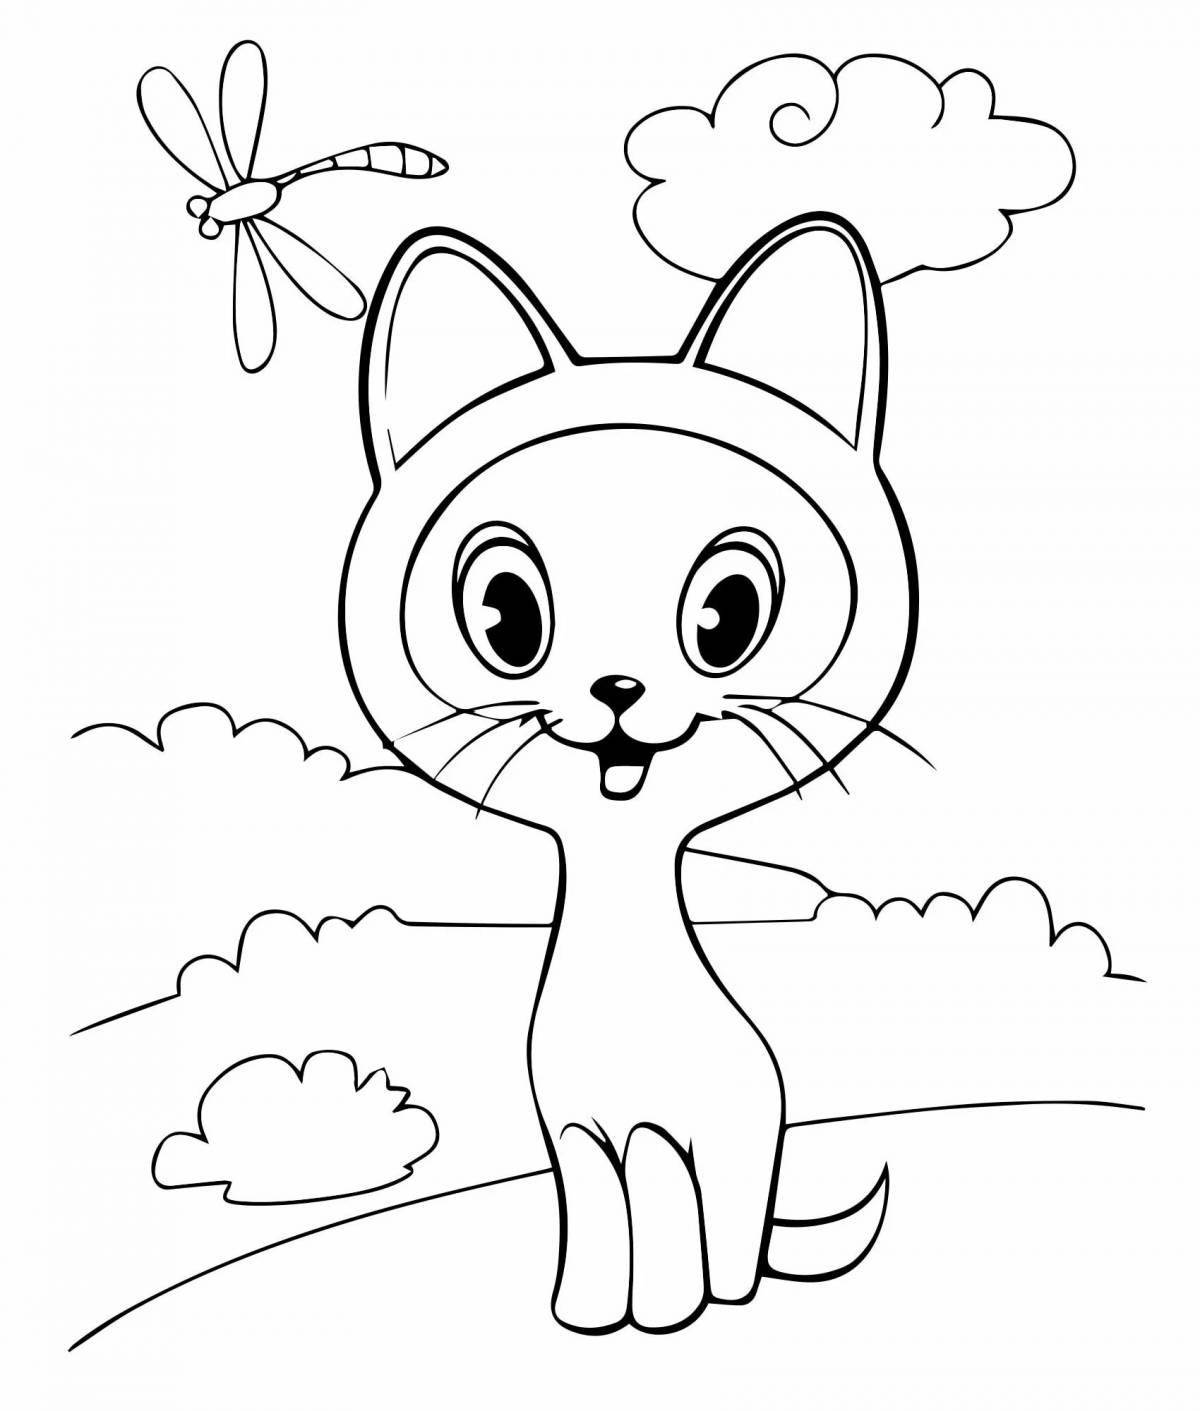 Adorable little kitty coloring book